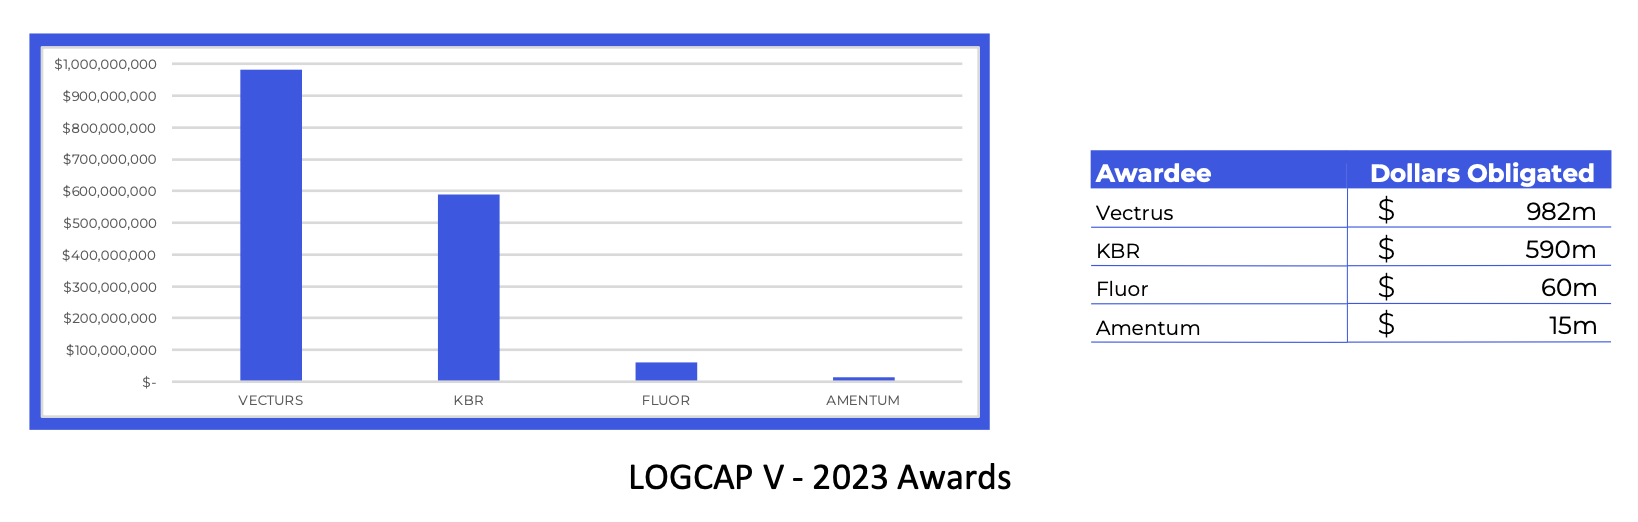 LOGCAP spenidng in 2023 - bar graph with table.